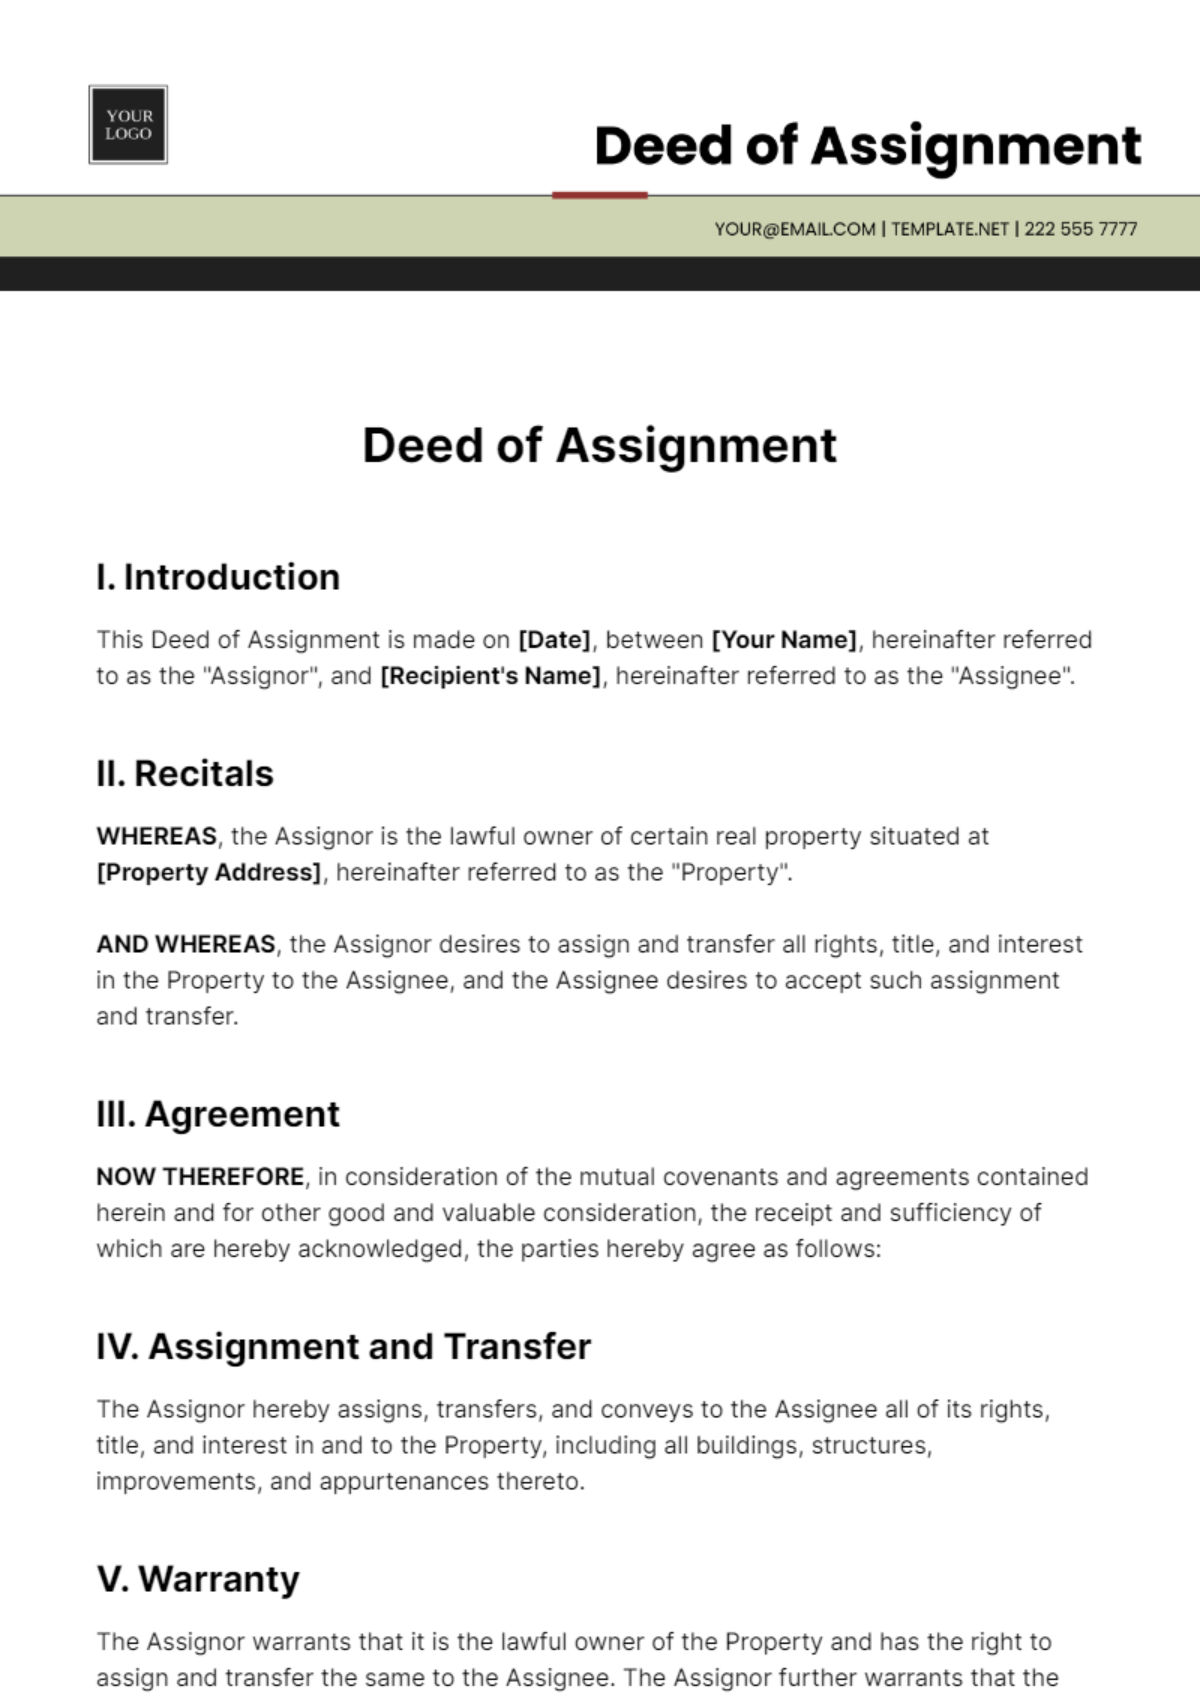 Free Deed of Assignment Template